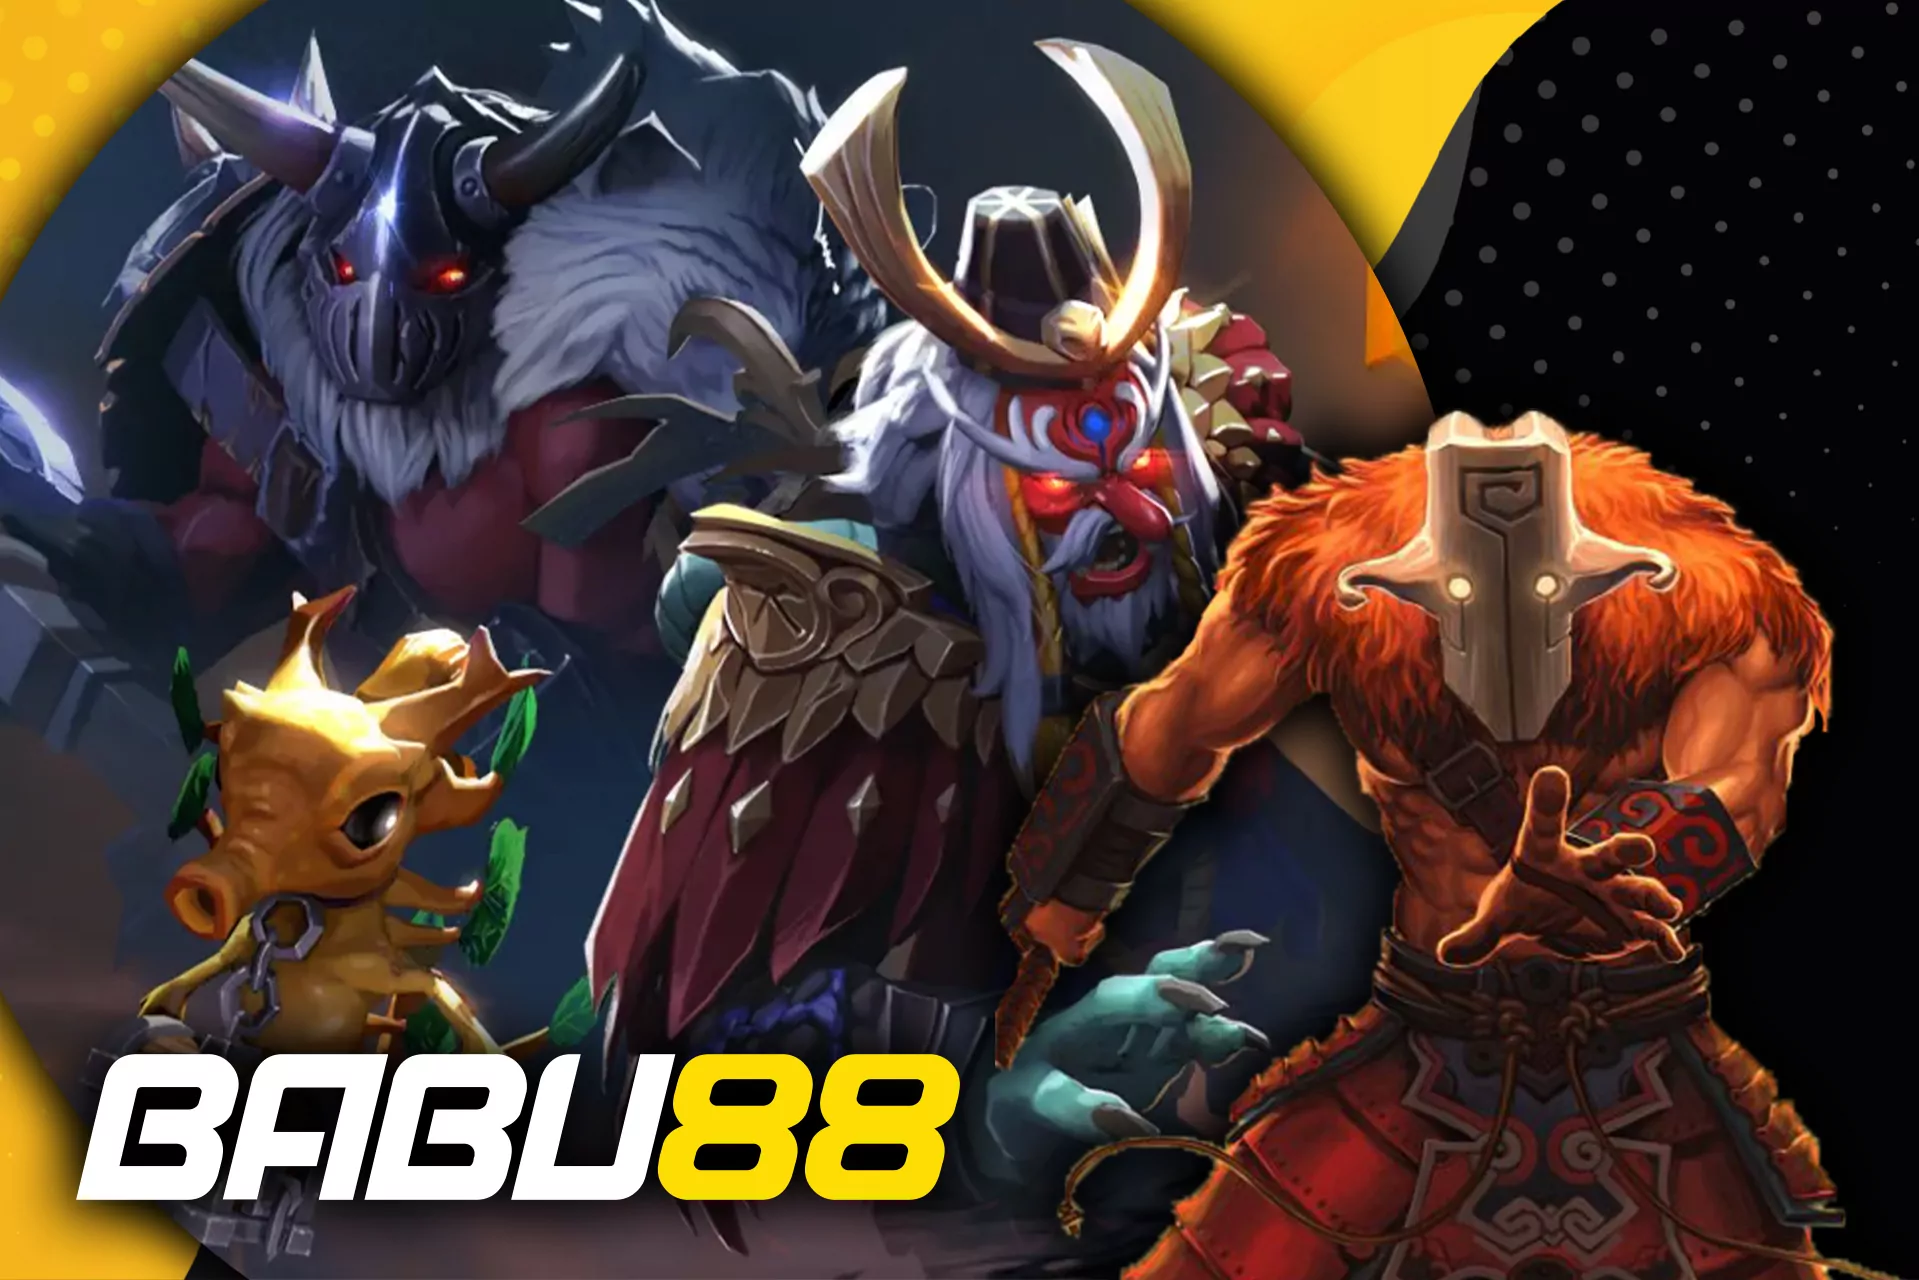 Dota 2 is available for betting for cybersports amateurs at Babu88.